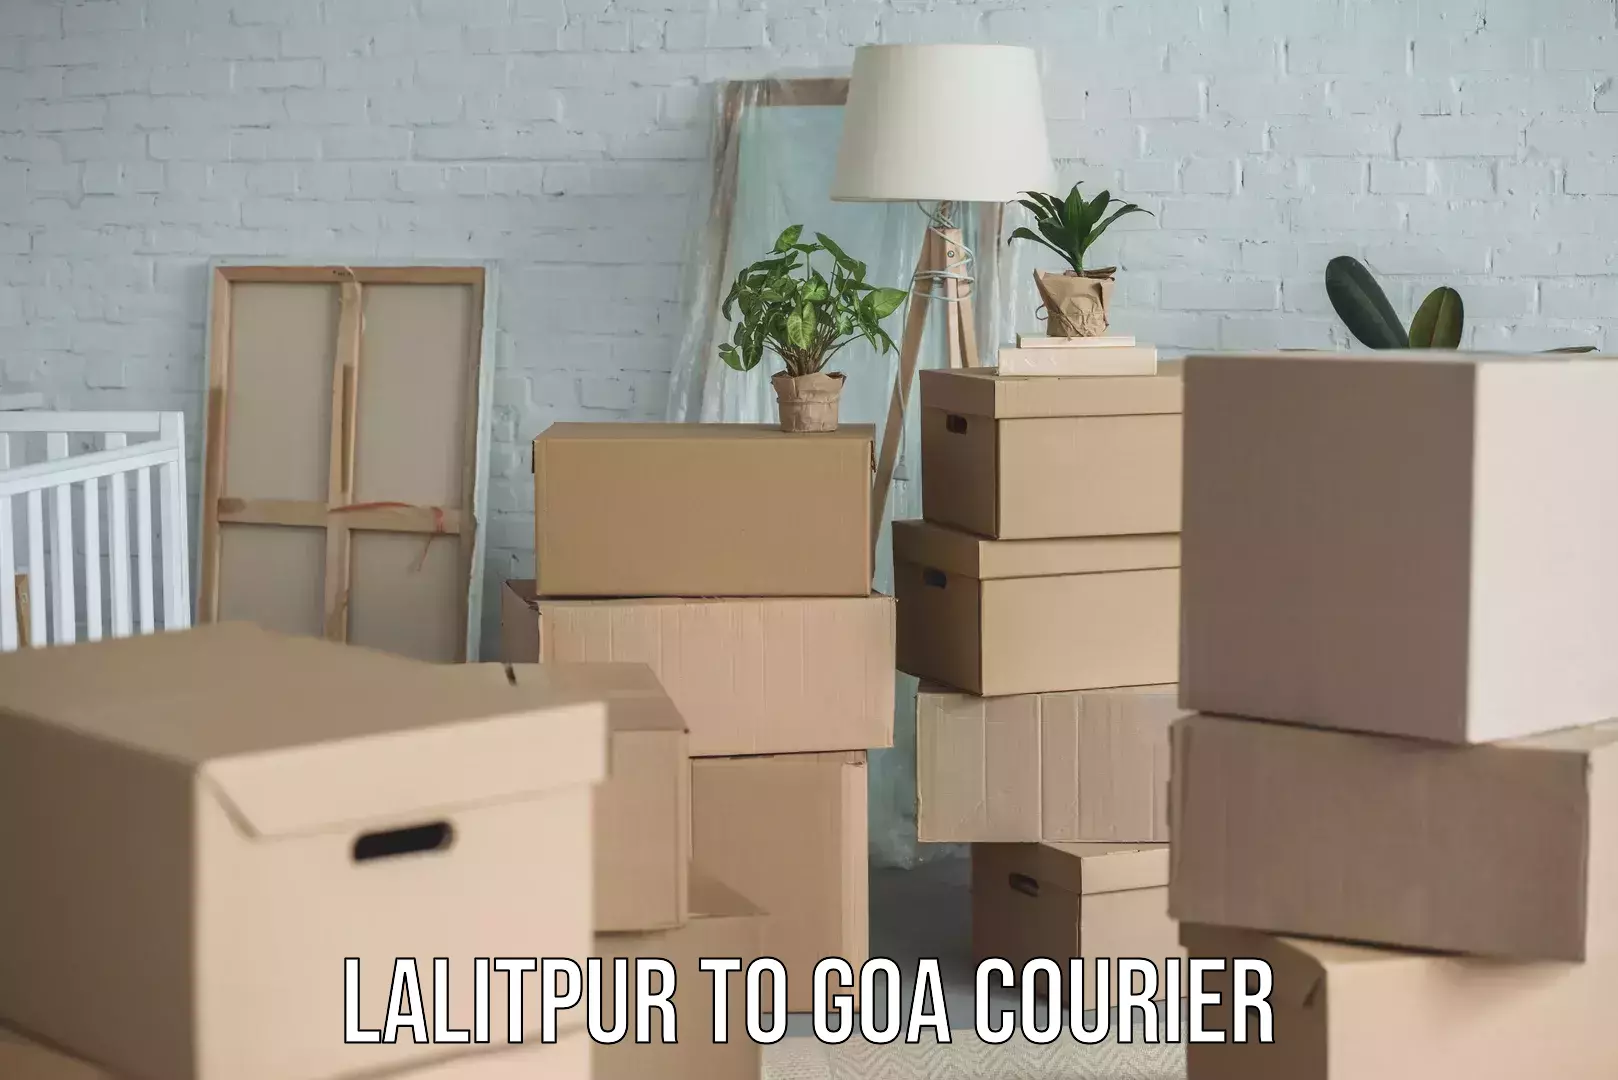 Trusted relocation experts Lalitpur to Goa